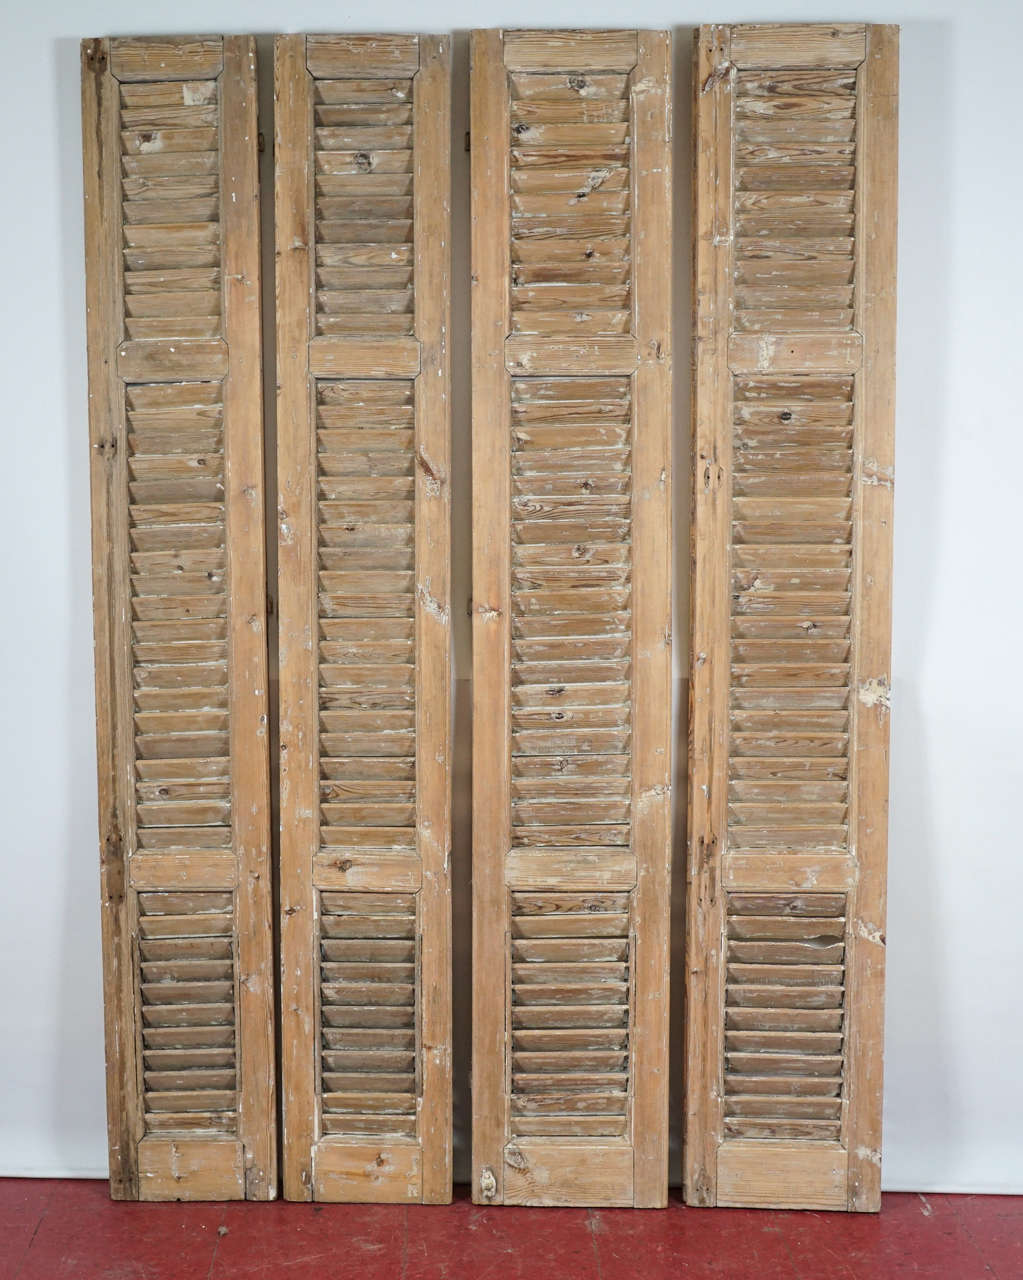 Wonderfully distressed vintage shutters with most of the paint already removed.  These shutters are well made with thick framing and stationary louvres.  The shutters have half the socket hinges attached to them.  Would make a fabulous